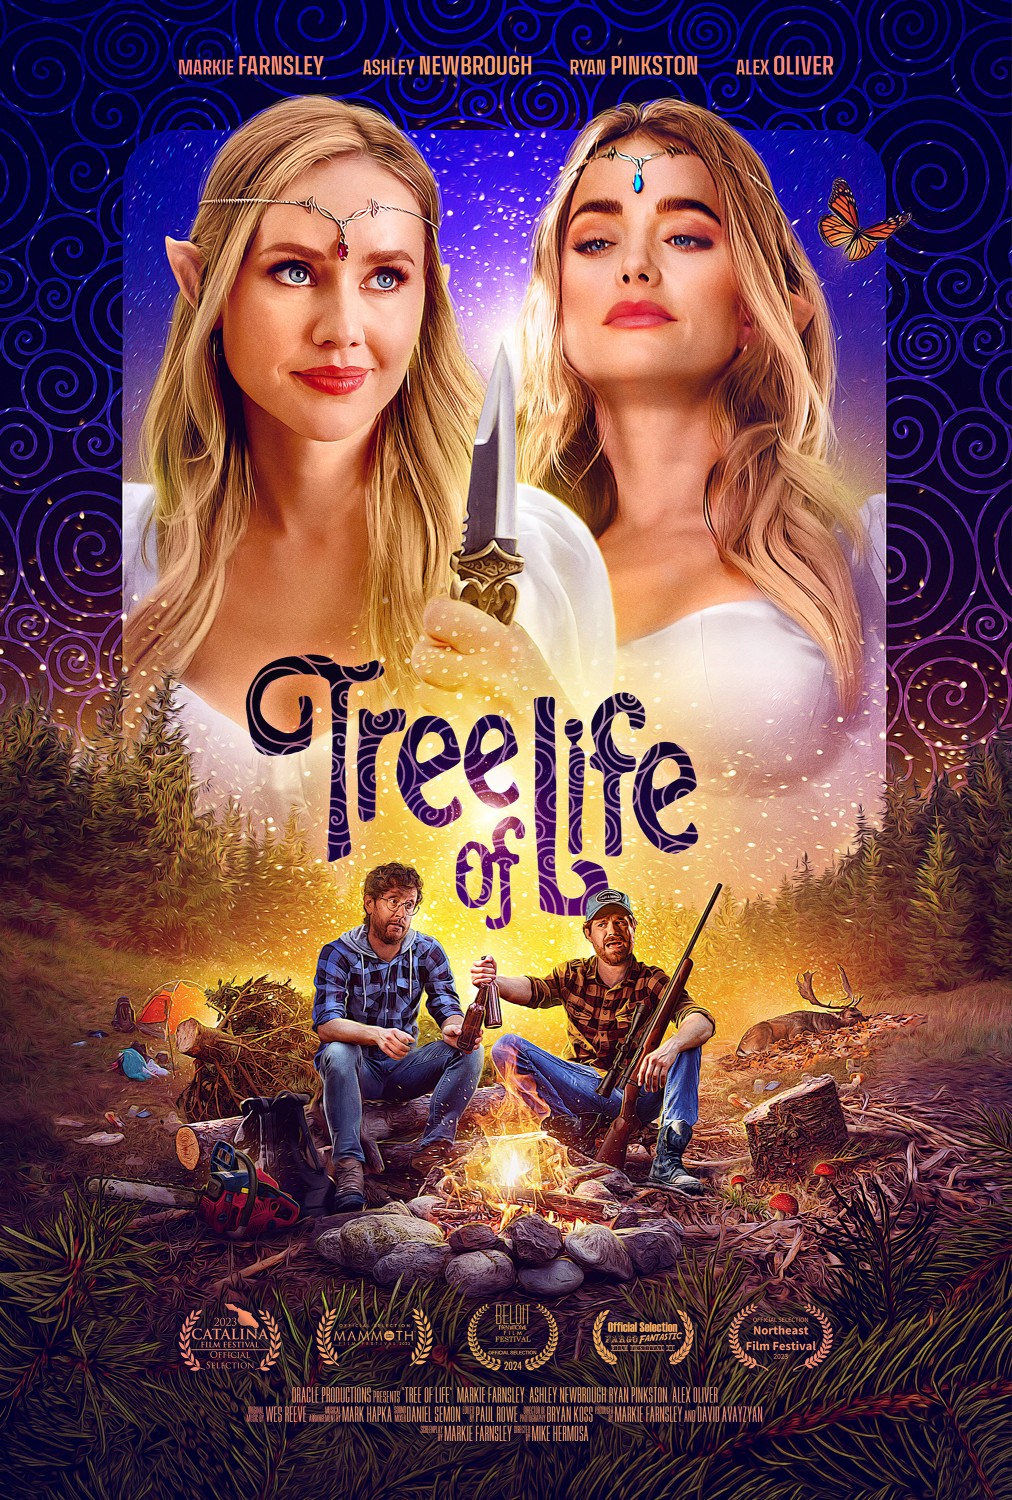 Extra Large Movie Poster Image for Tree of Life